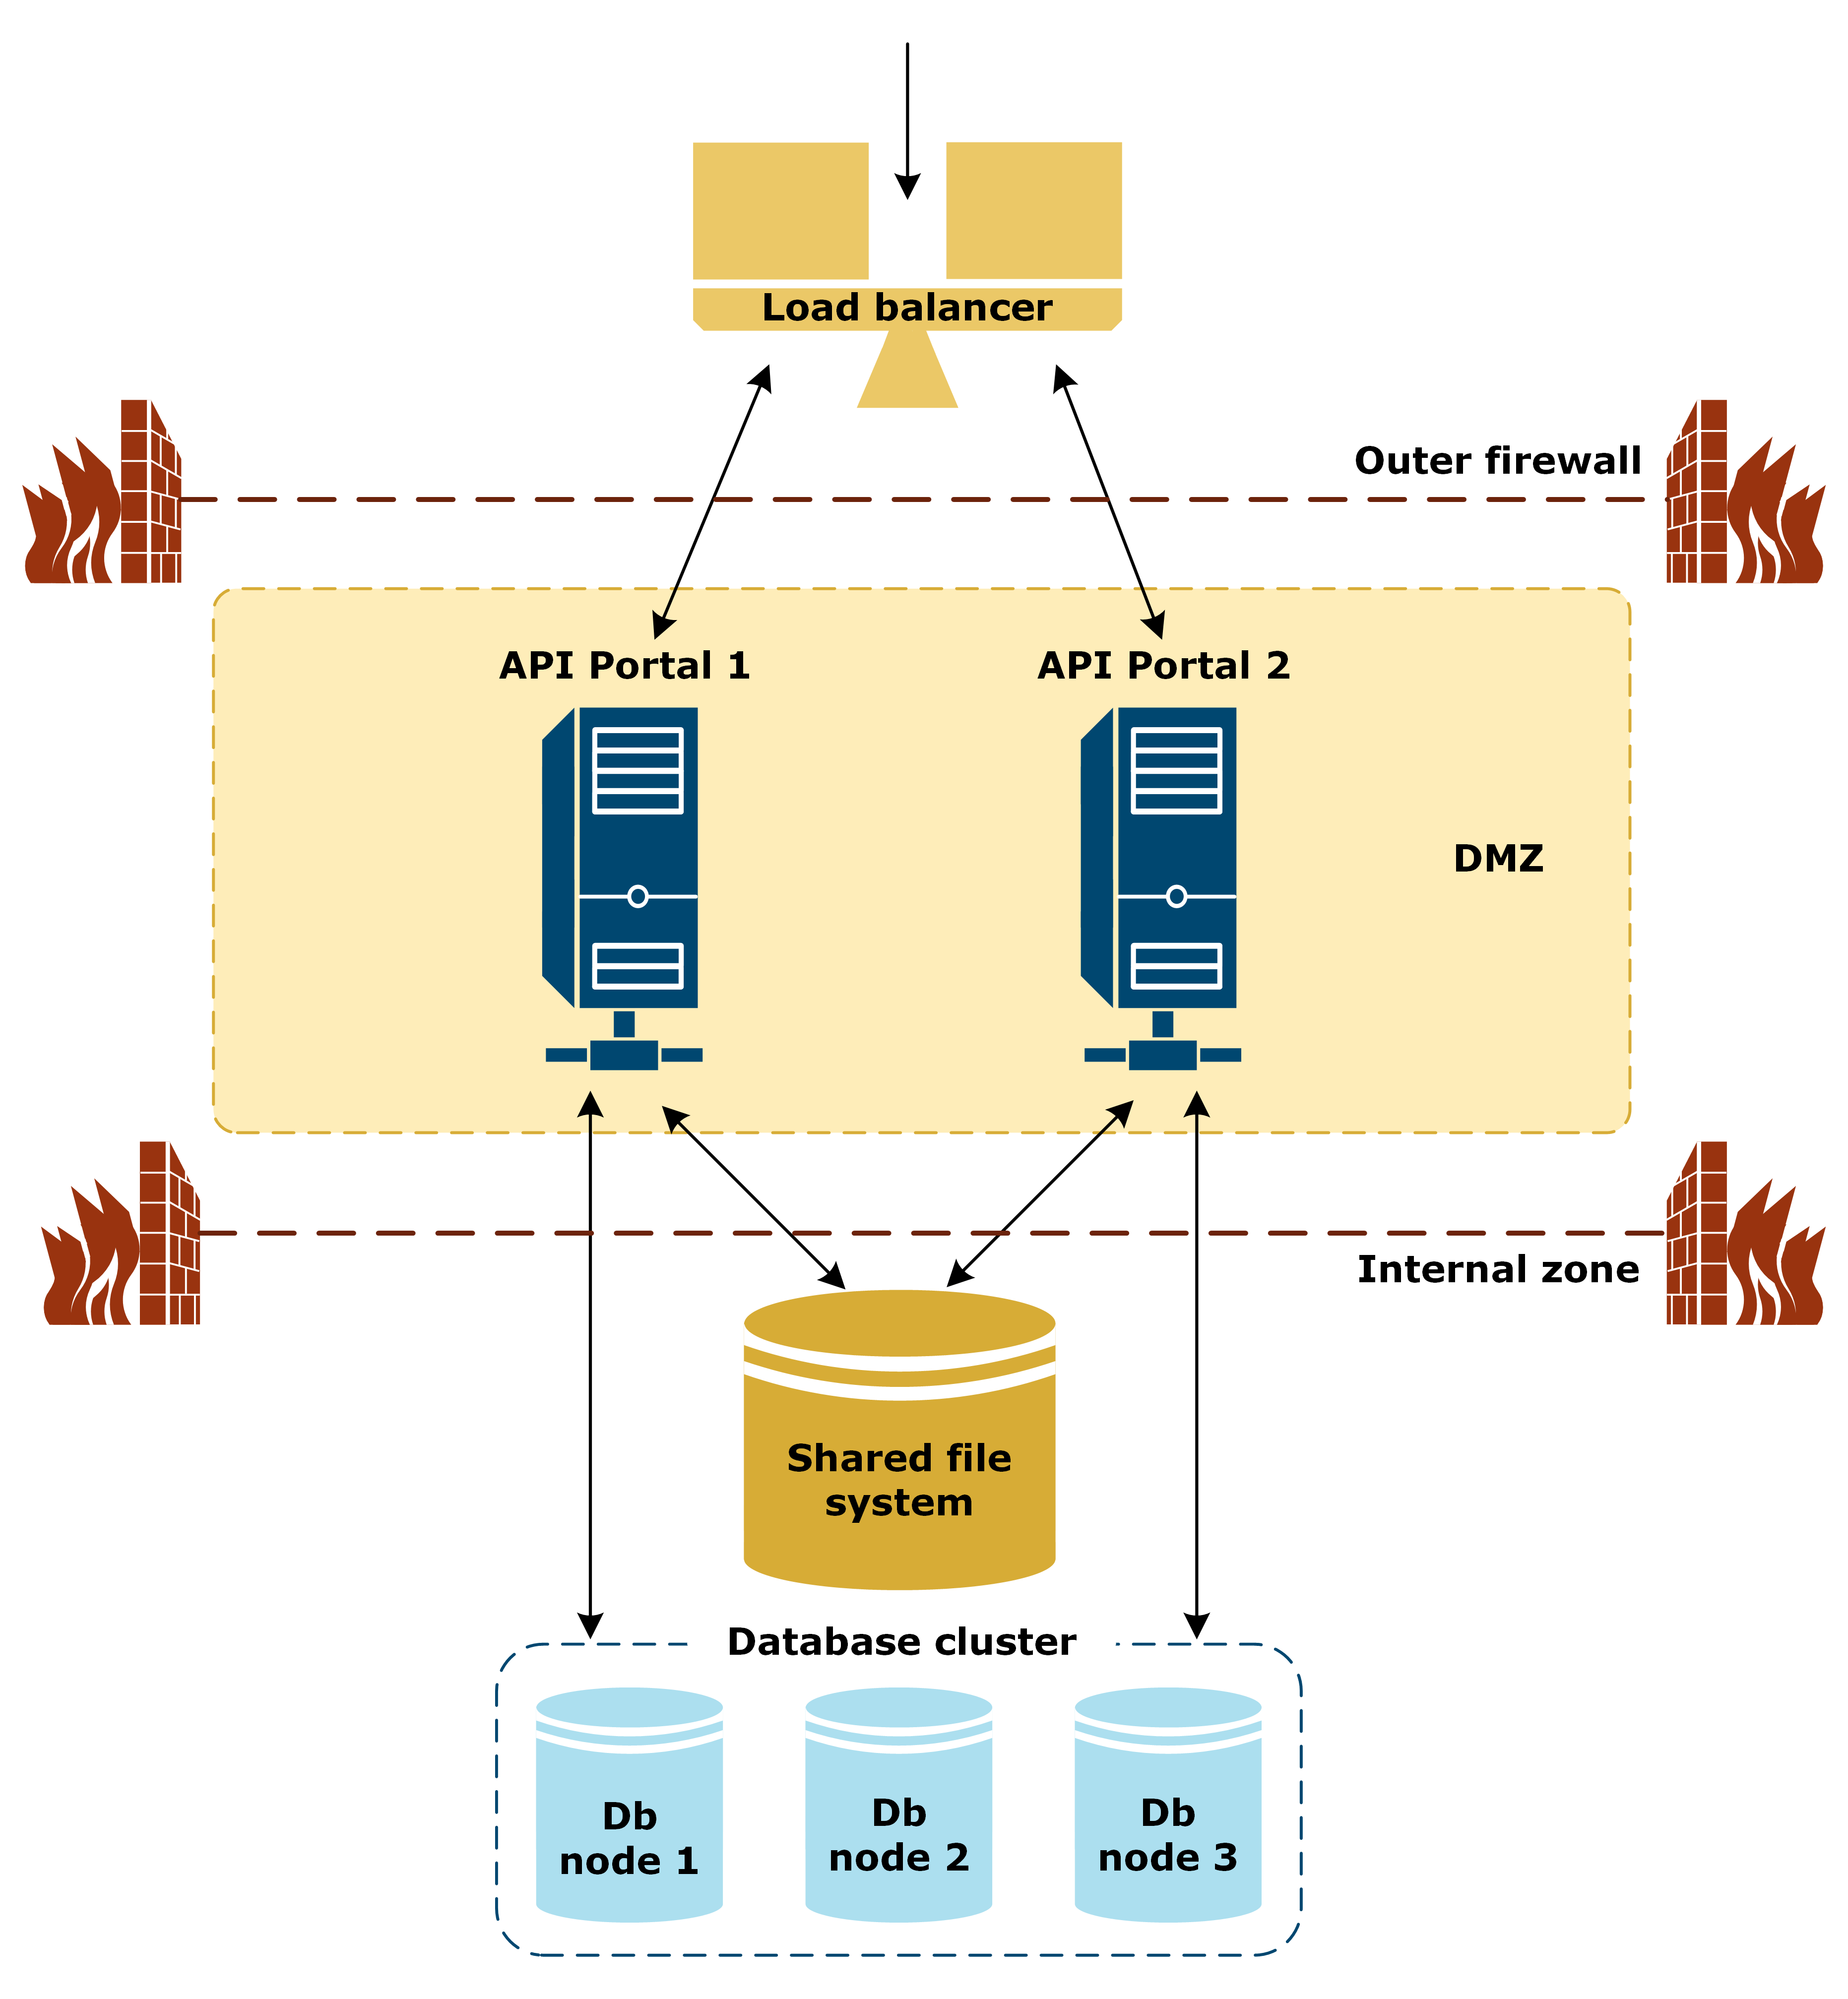 Illustration of a reference architecture for API Portal HA in a single datacenter